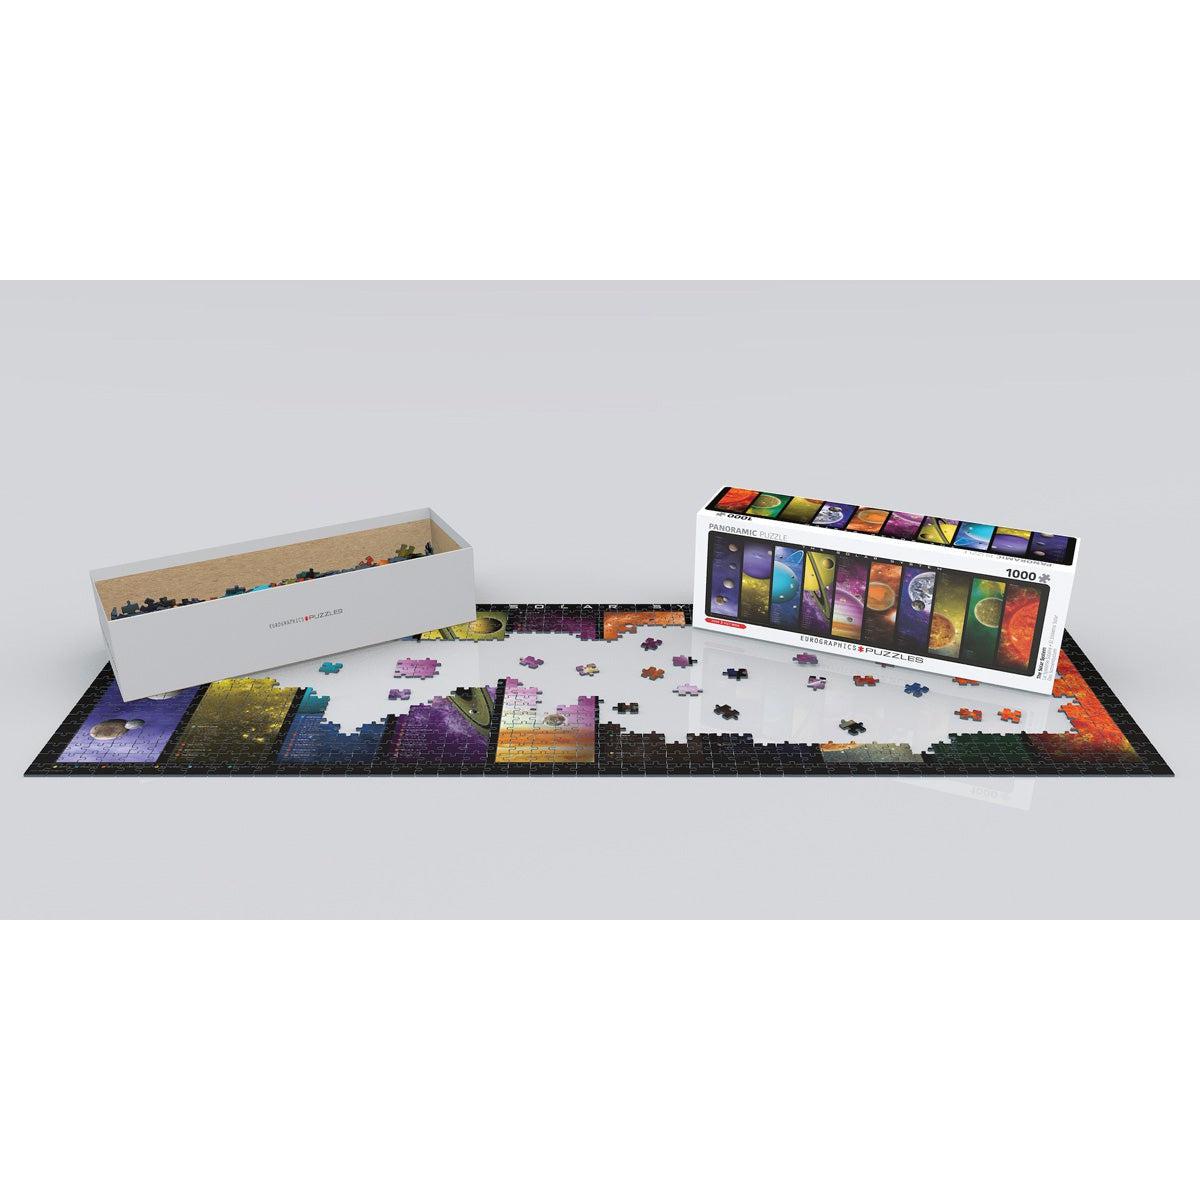 The Solar System 1000 Piece Panoramic Jigsaw Puzzle Eurographics